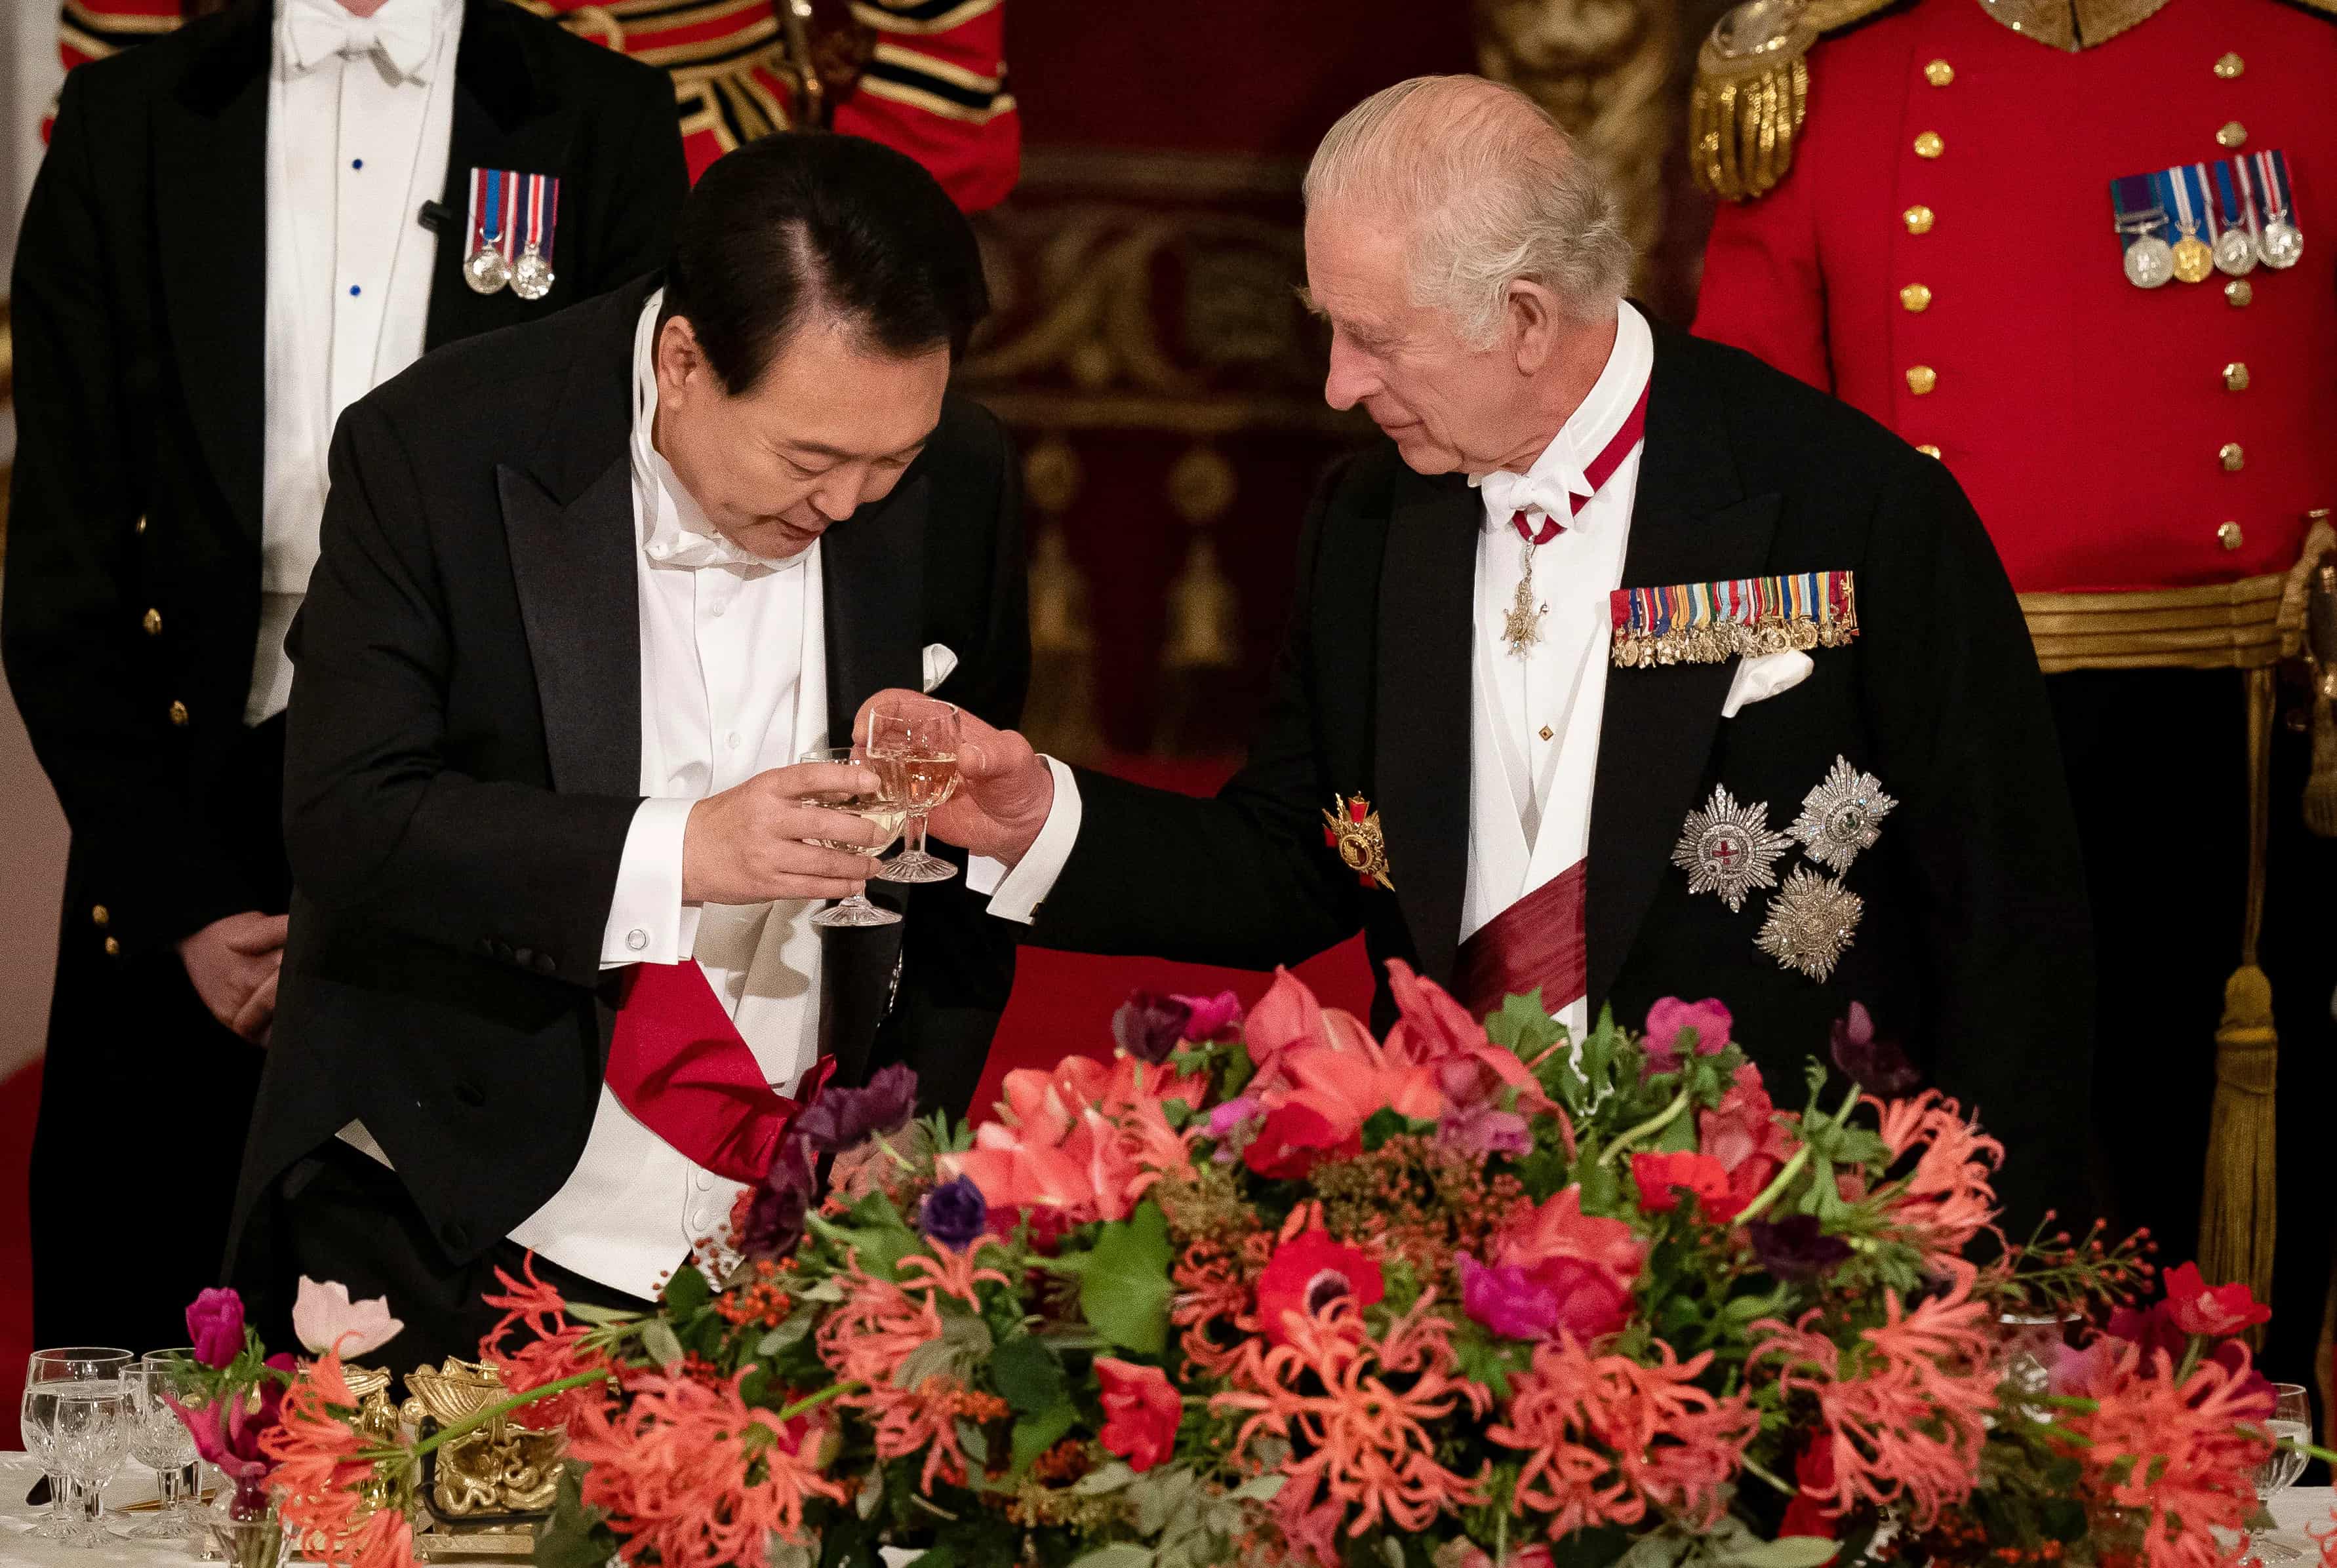 2 of 4 | President of South Korea Yoon Suk Yeol and King Charles III during a toast at the state banquet at Buckingham Palace, London, Tuesday, Nov. 21, 2023 for the state visit to the UK by President of South Korea Yoon Suk Yeol and his wife Kim Keon Hee. (Aaron Chown/Pool Photo via AP)